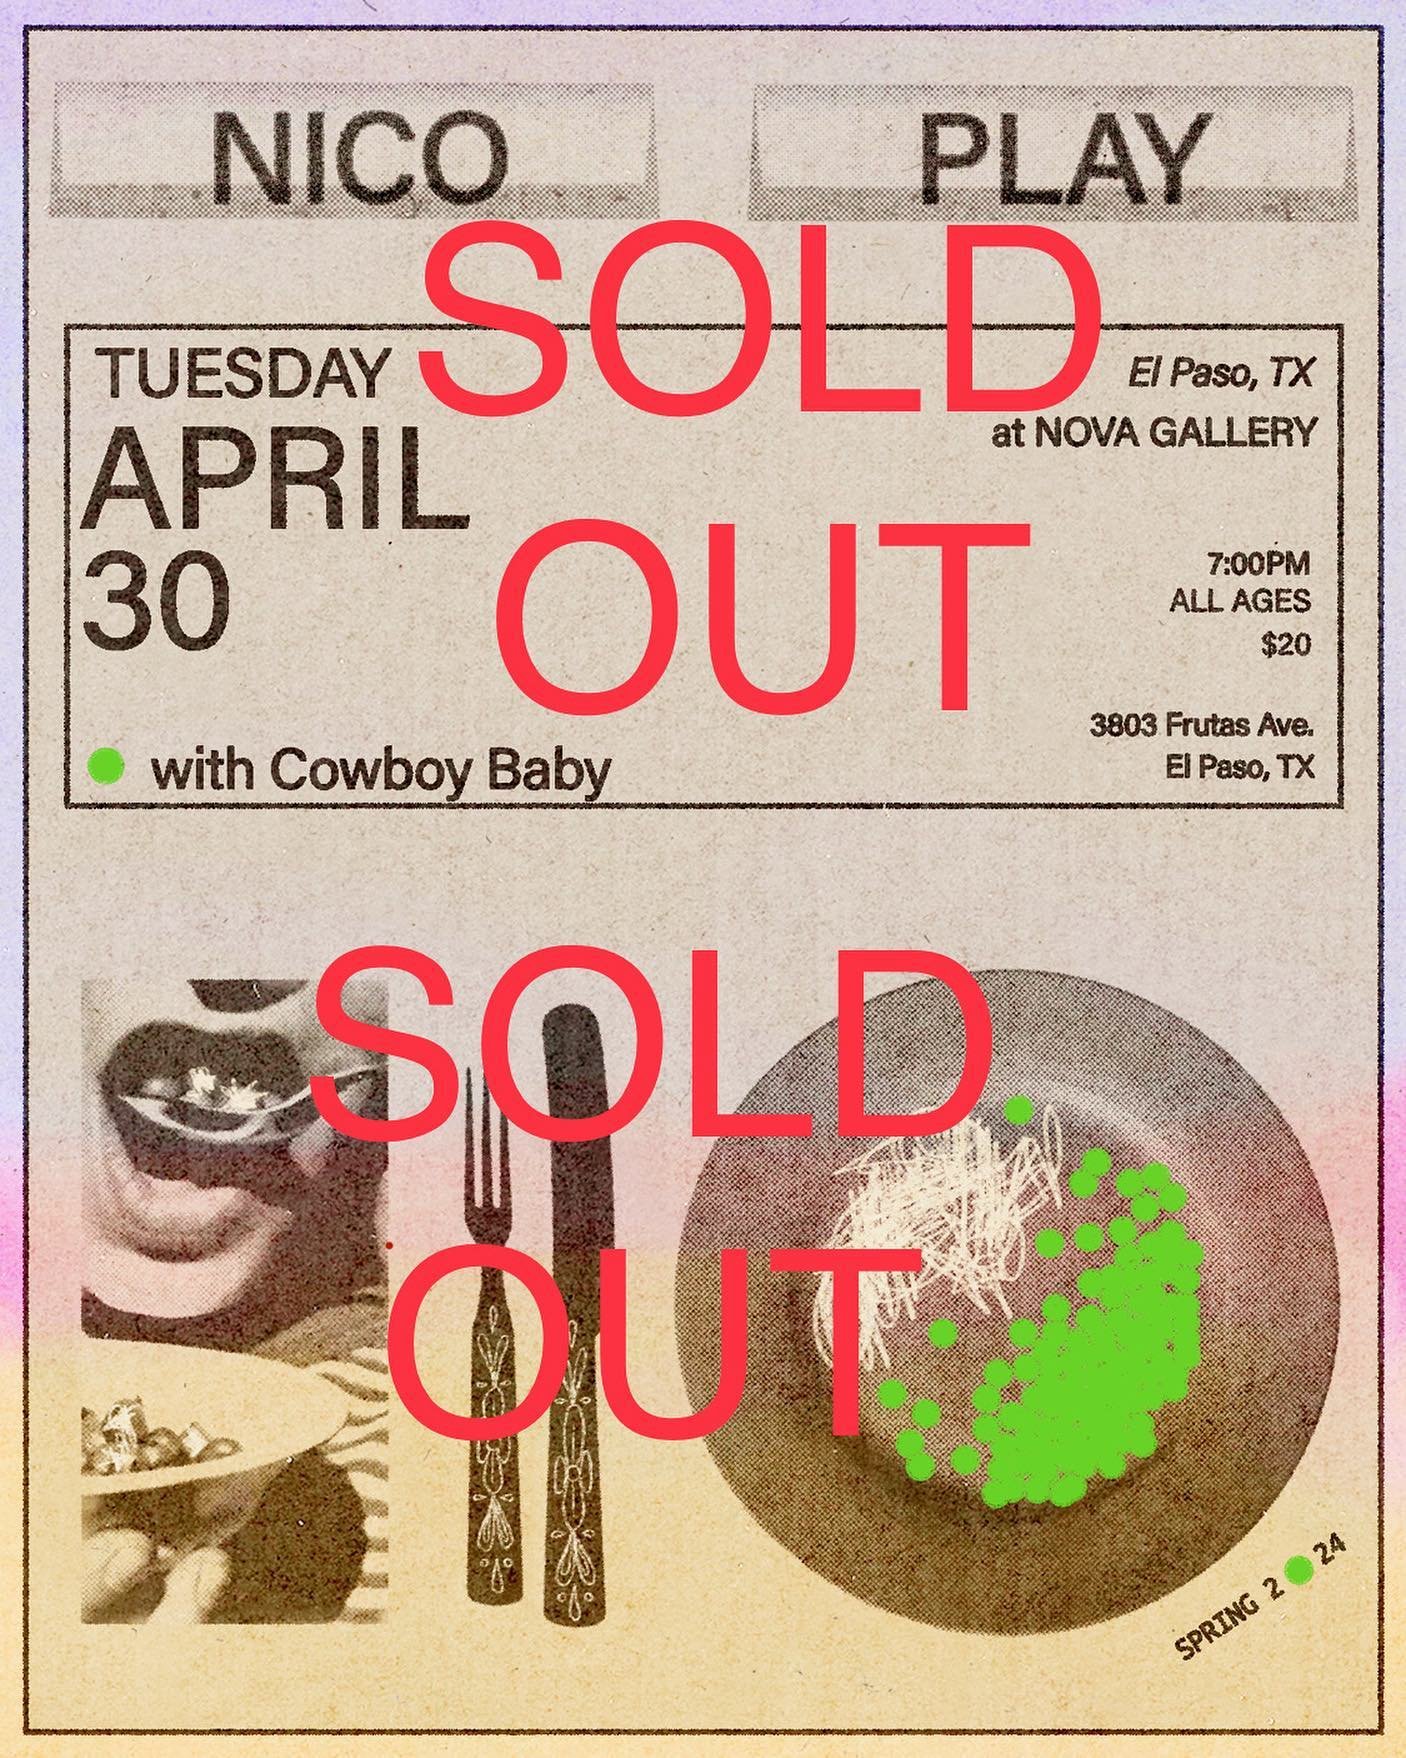 💥SOLD OUT💥
@nicoplay.wav returns to the desert of El Paso TX for a sold-out performance at @super.ultra.nova. Nico Play will be joined by @cowboybaaaby, opening the performances. If you got tickets, we will see you there!